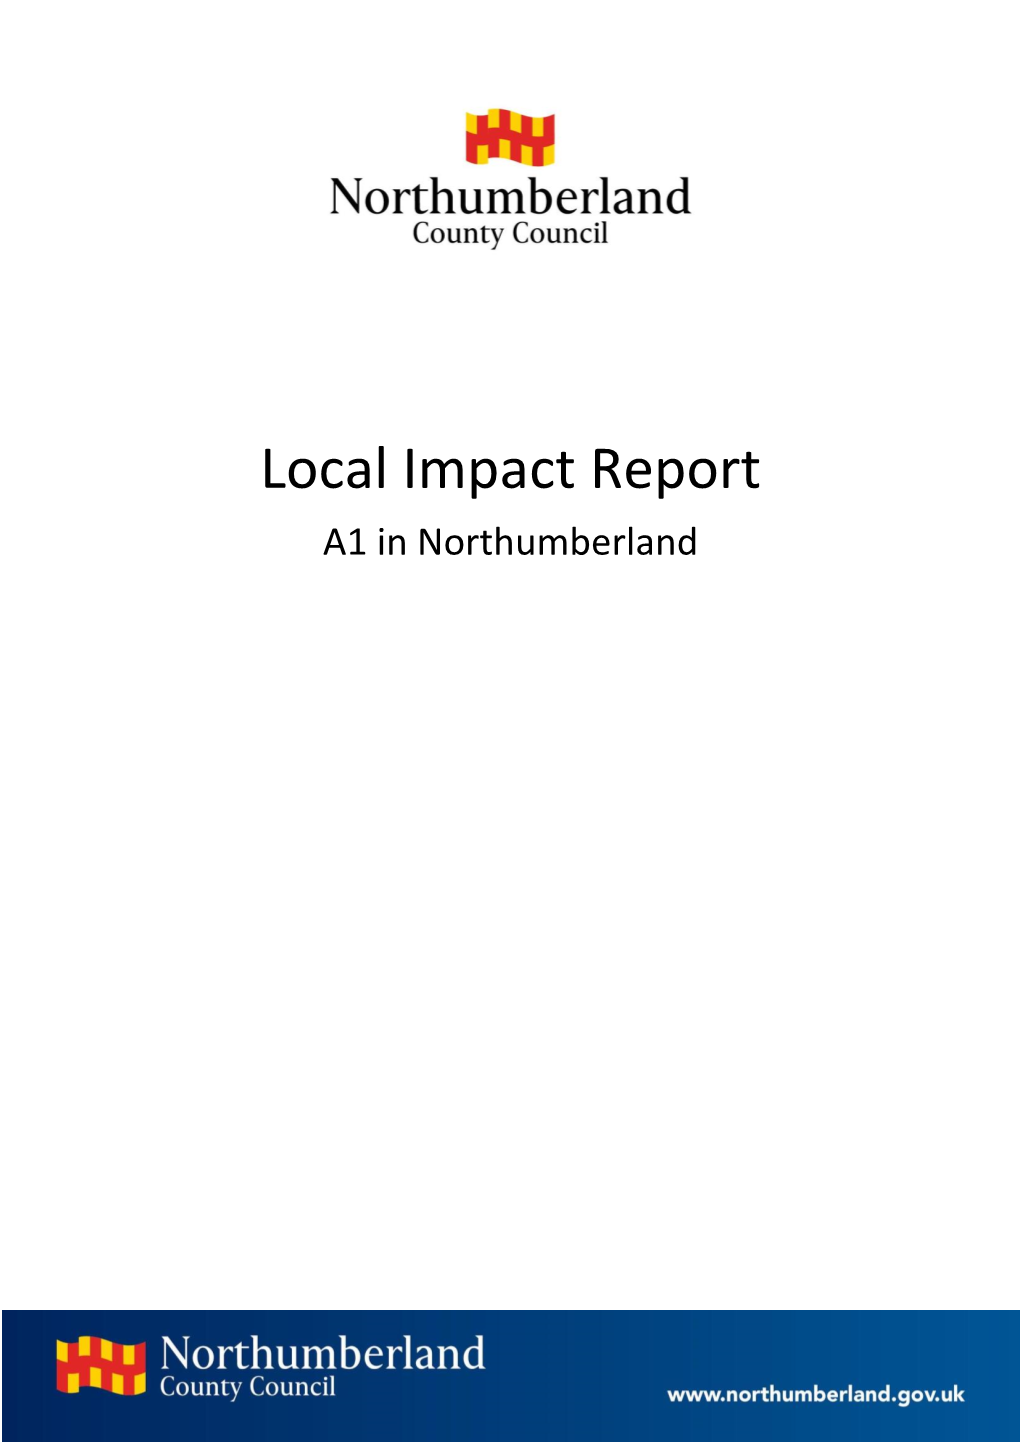 Northumberland County Council Transport Assessment Mitigation Report (January 2019) ● the Northumberland Local Transport Plan (2011-2026)